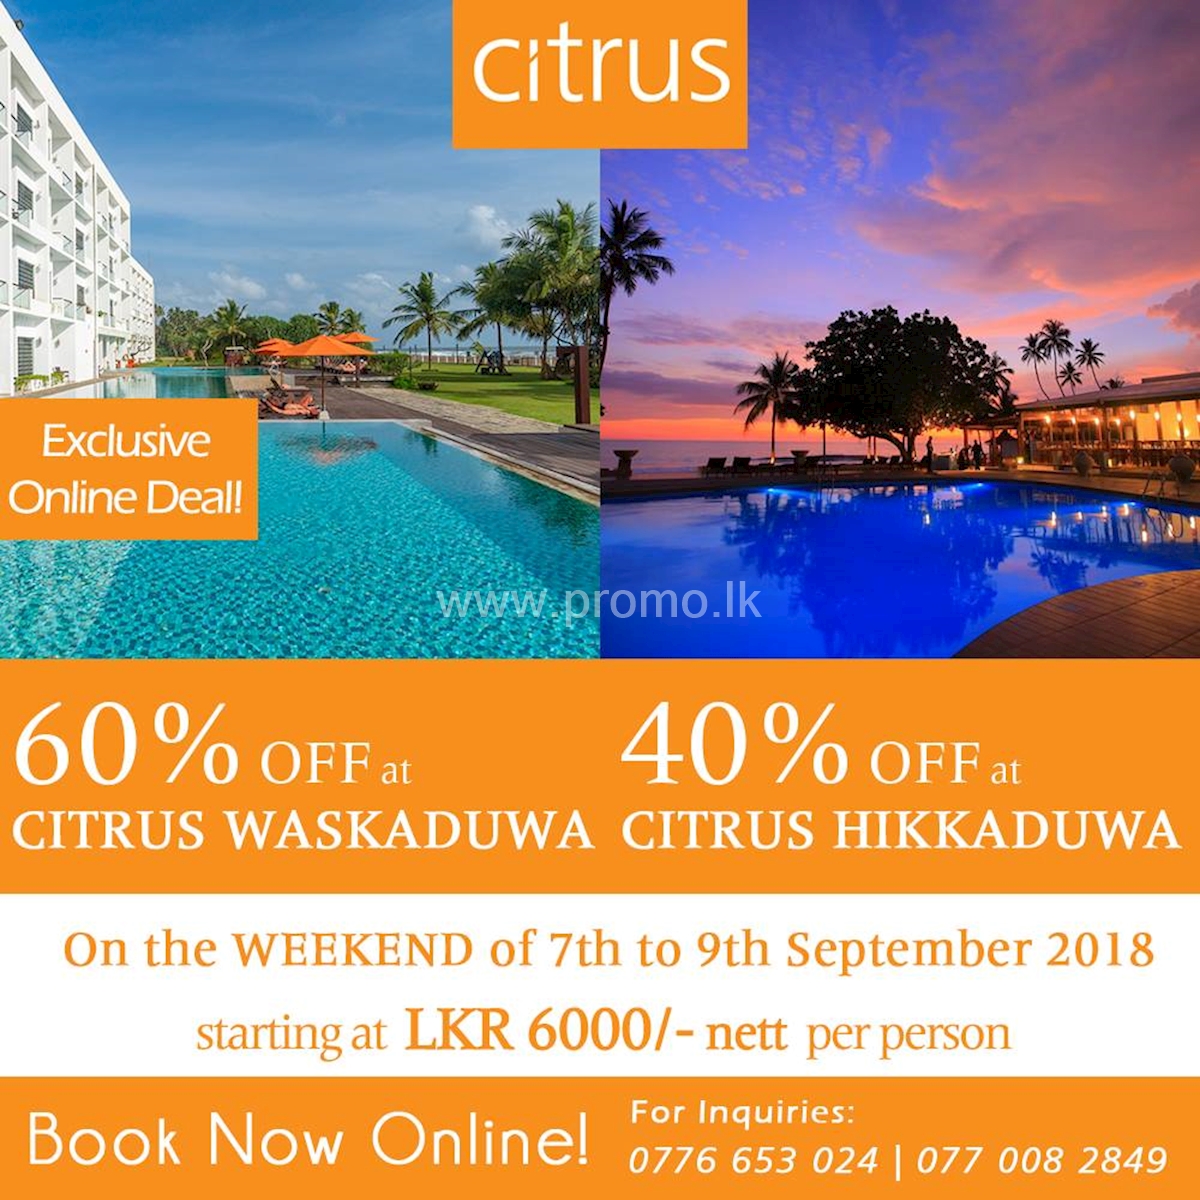 Exclusive Online Deals for this Weekend at Citrus and